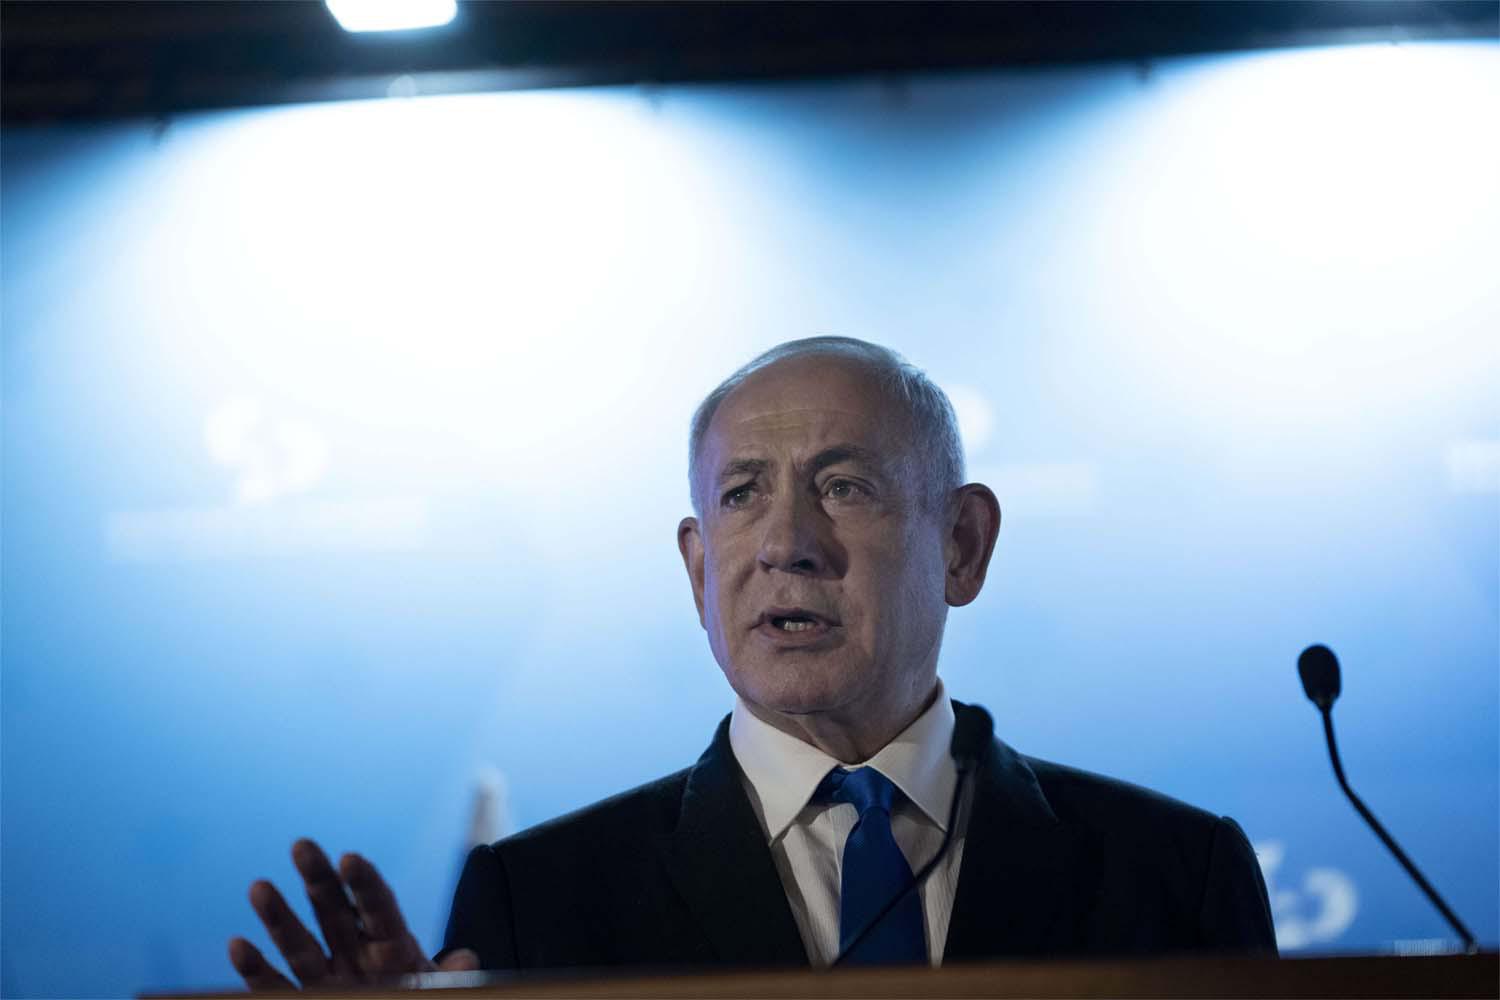 The standoff has plunged Israel into one of its greatest domestic crises